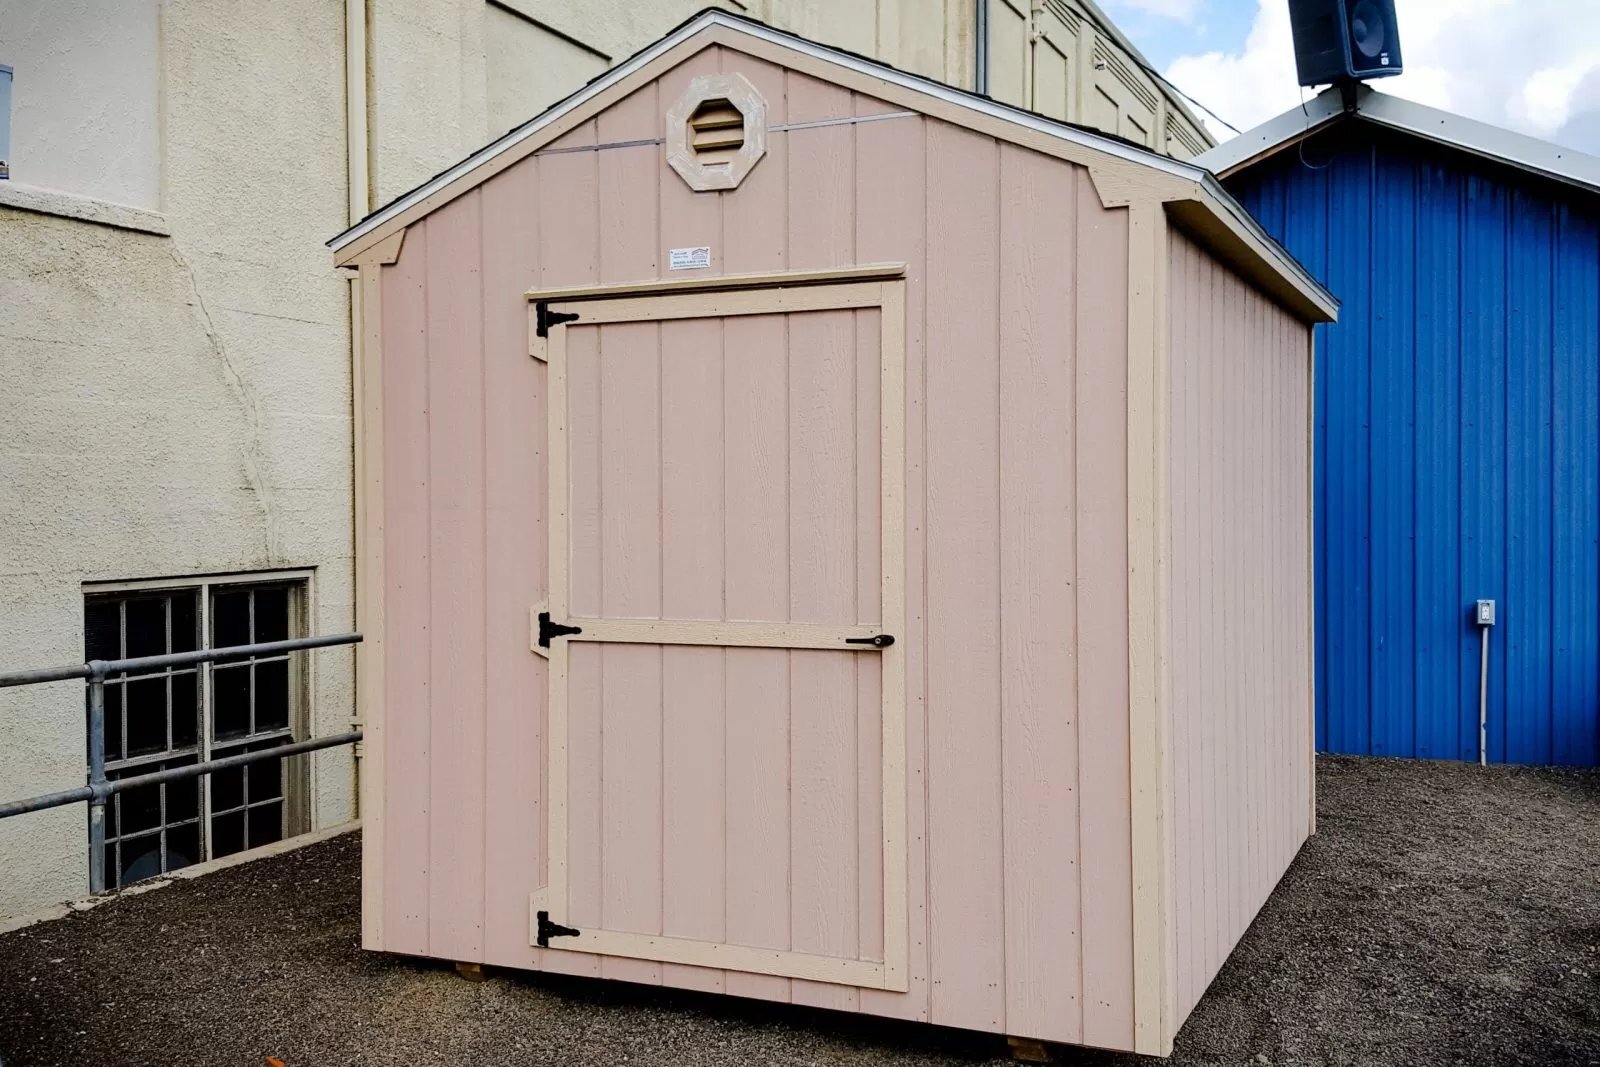 10x10 Shed Plans: DIY Guide To Building Your Own Outdoor Storage Space